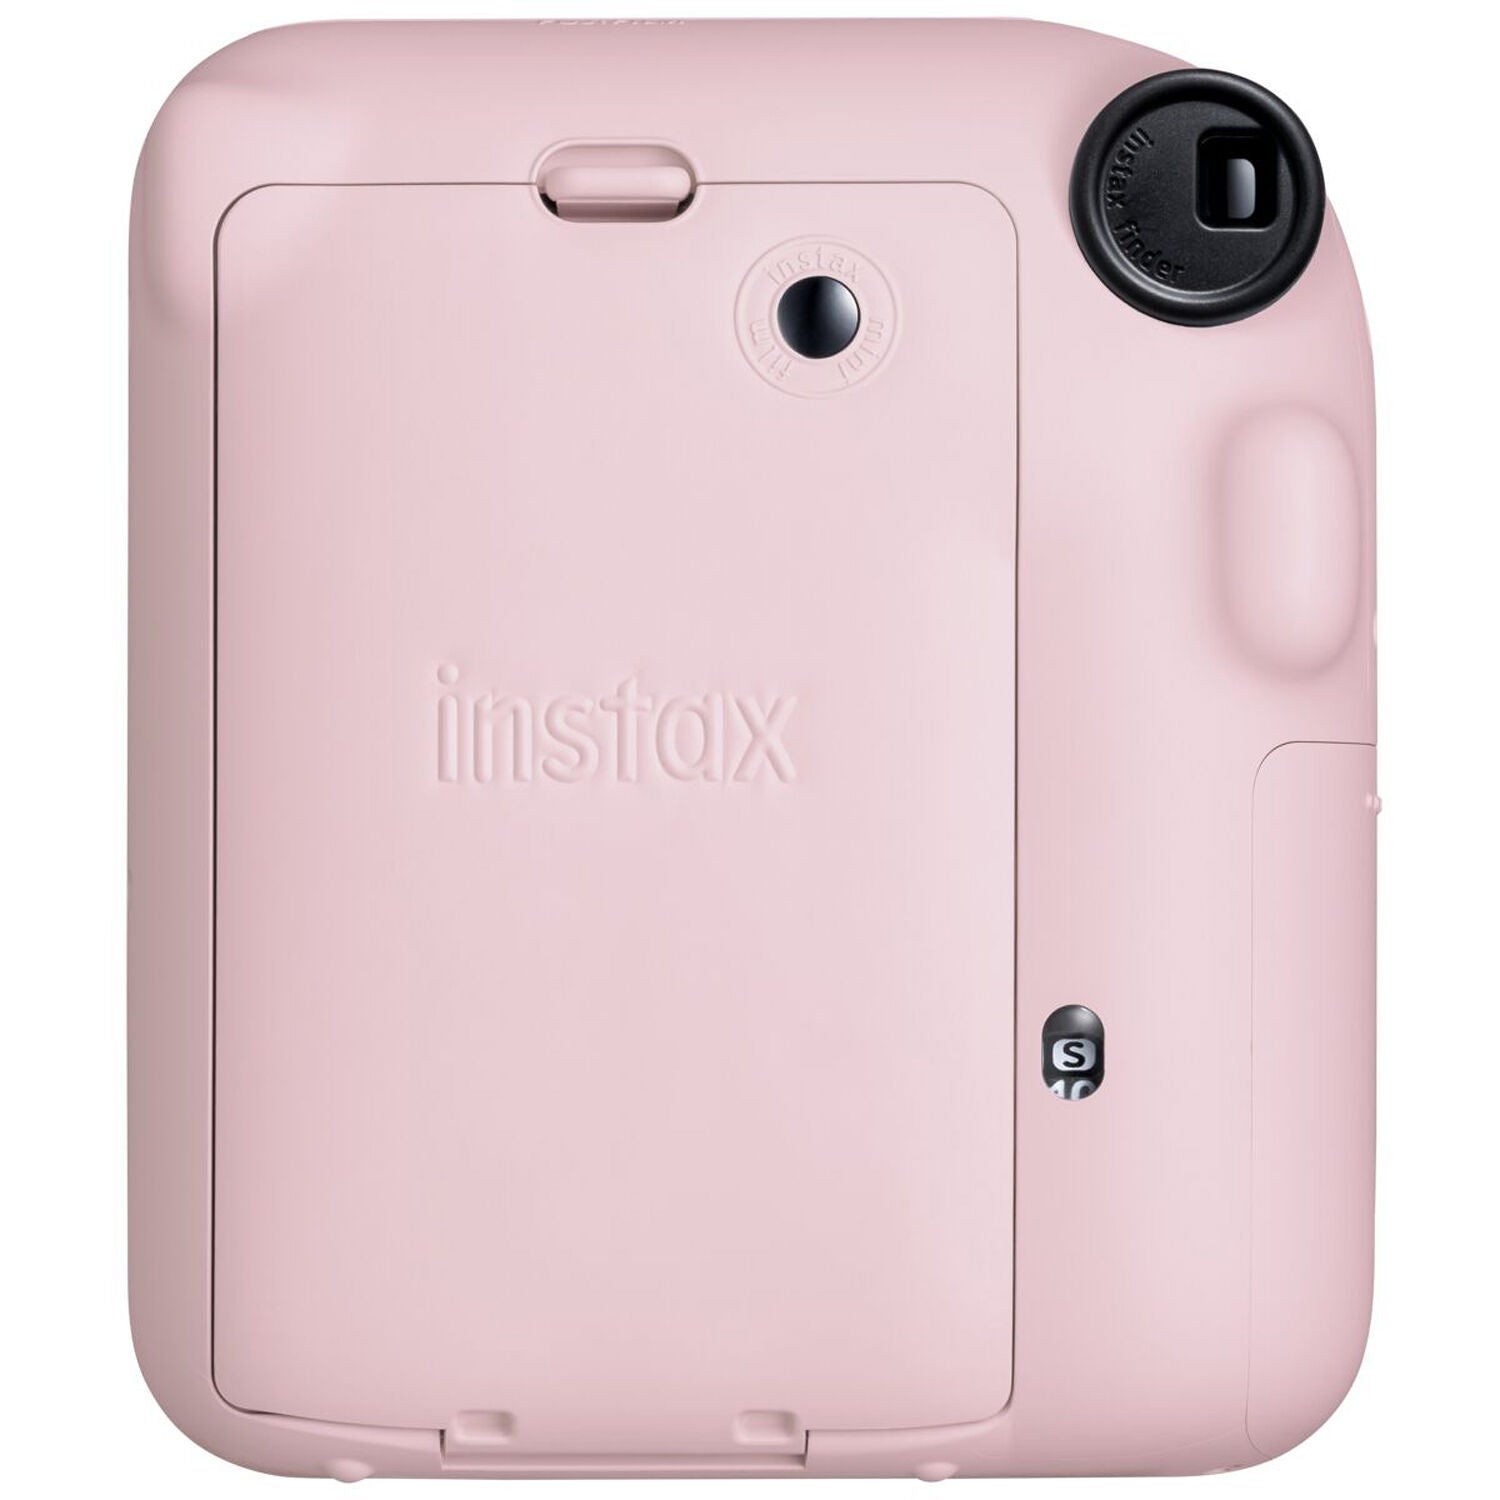 FUJIFILM INSTAX Mini 12 Instant Film Camera with 10X1 Pack of Instant Film With Red Pouch Kit (Blossom Pink, 10 Exposures)